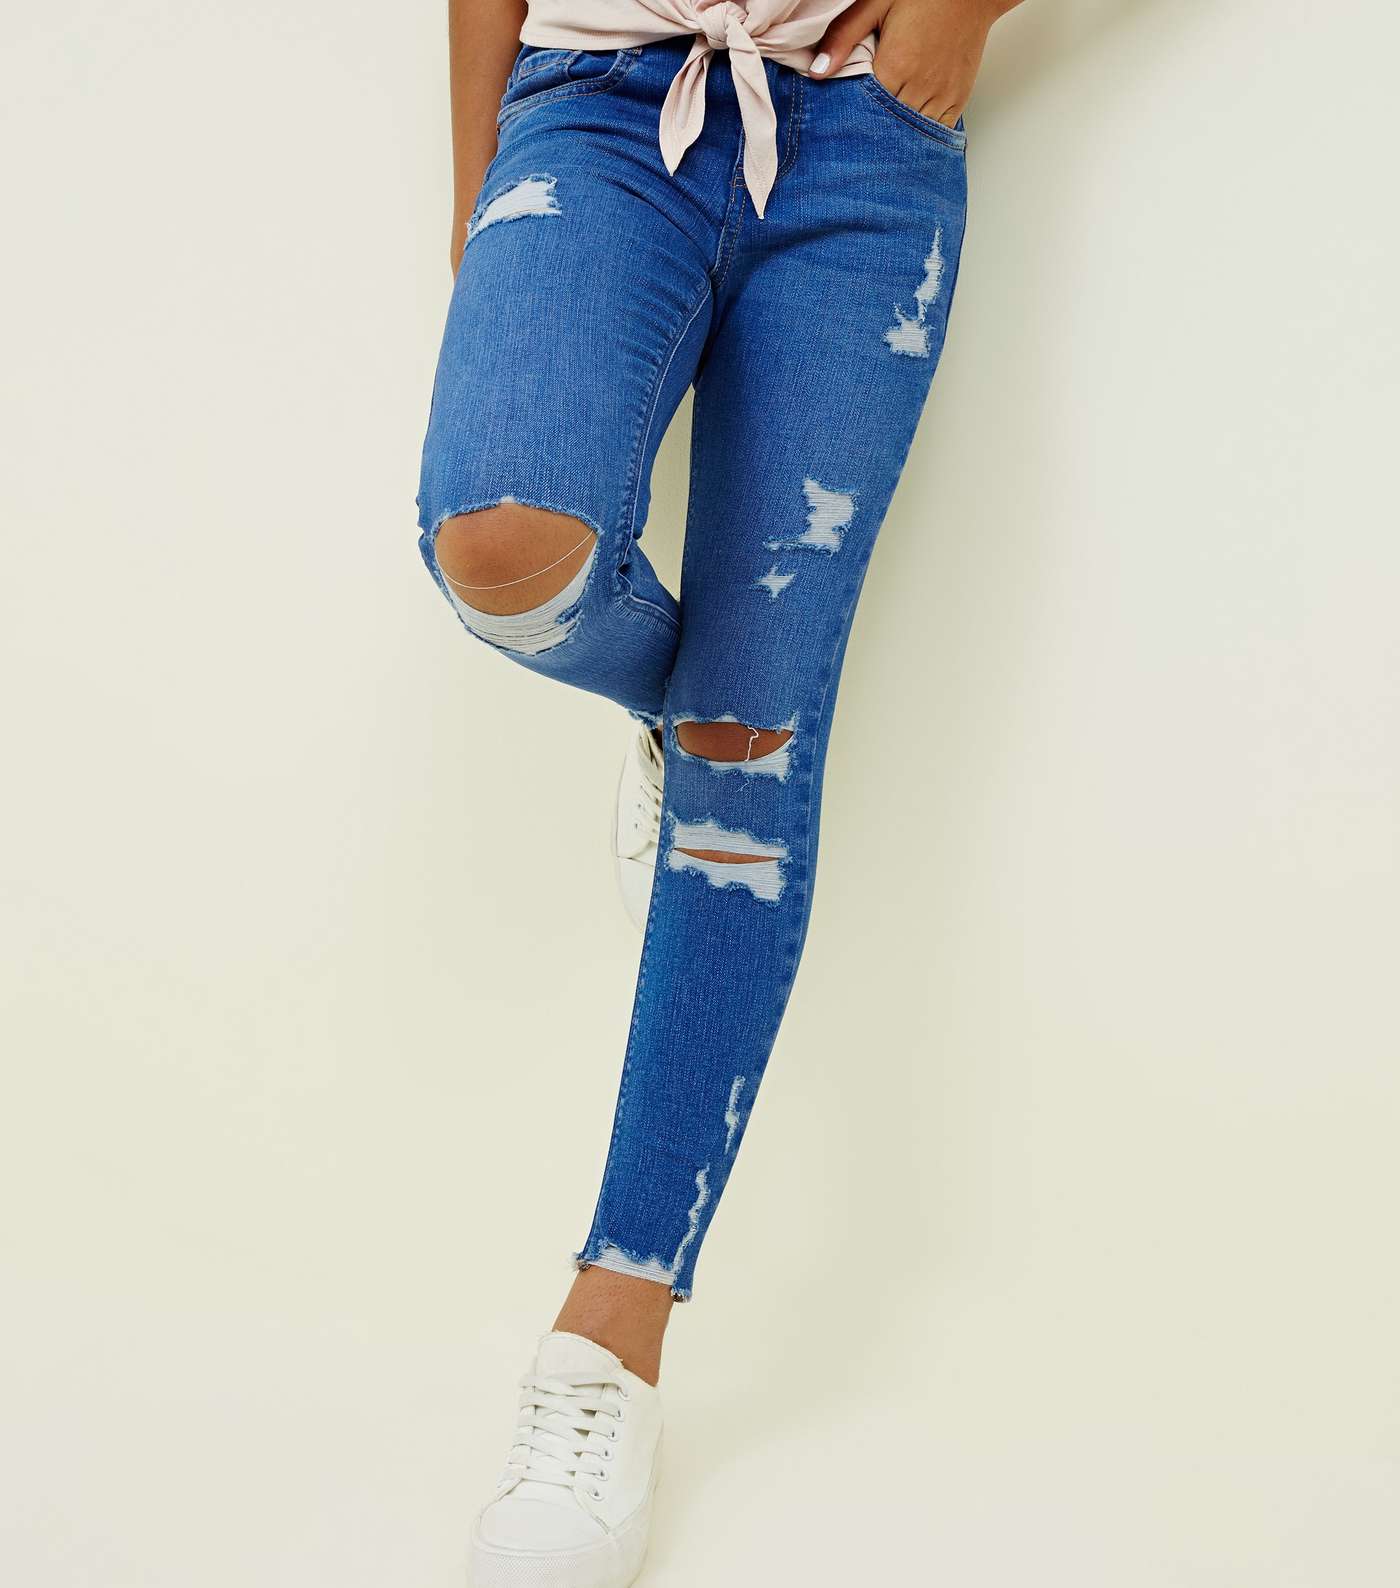 Girls Bright Blue Ripped Skinny Jeans Image 6